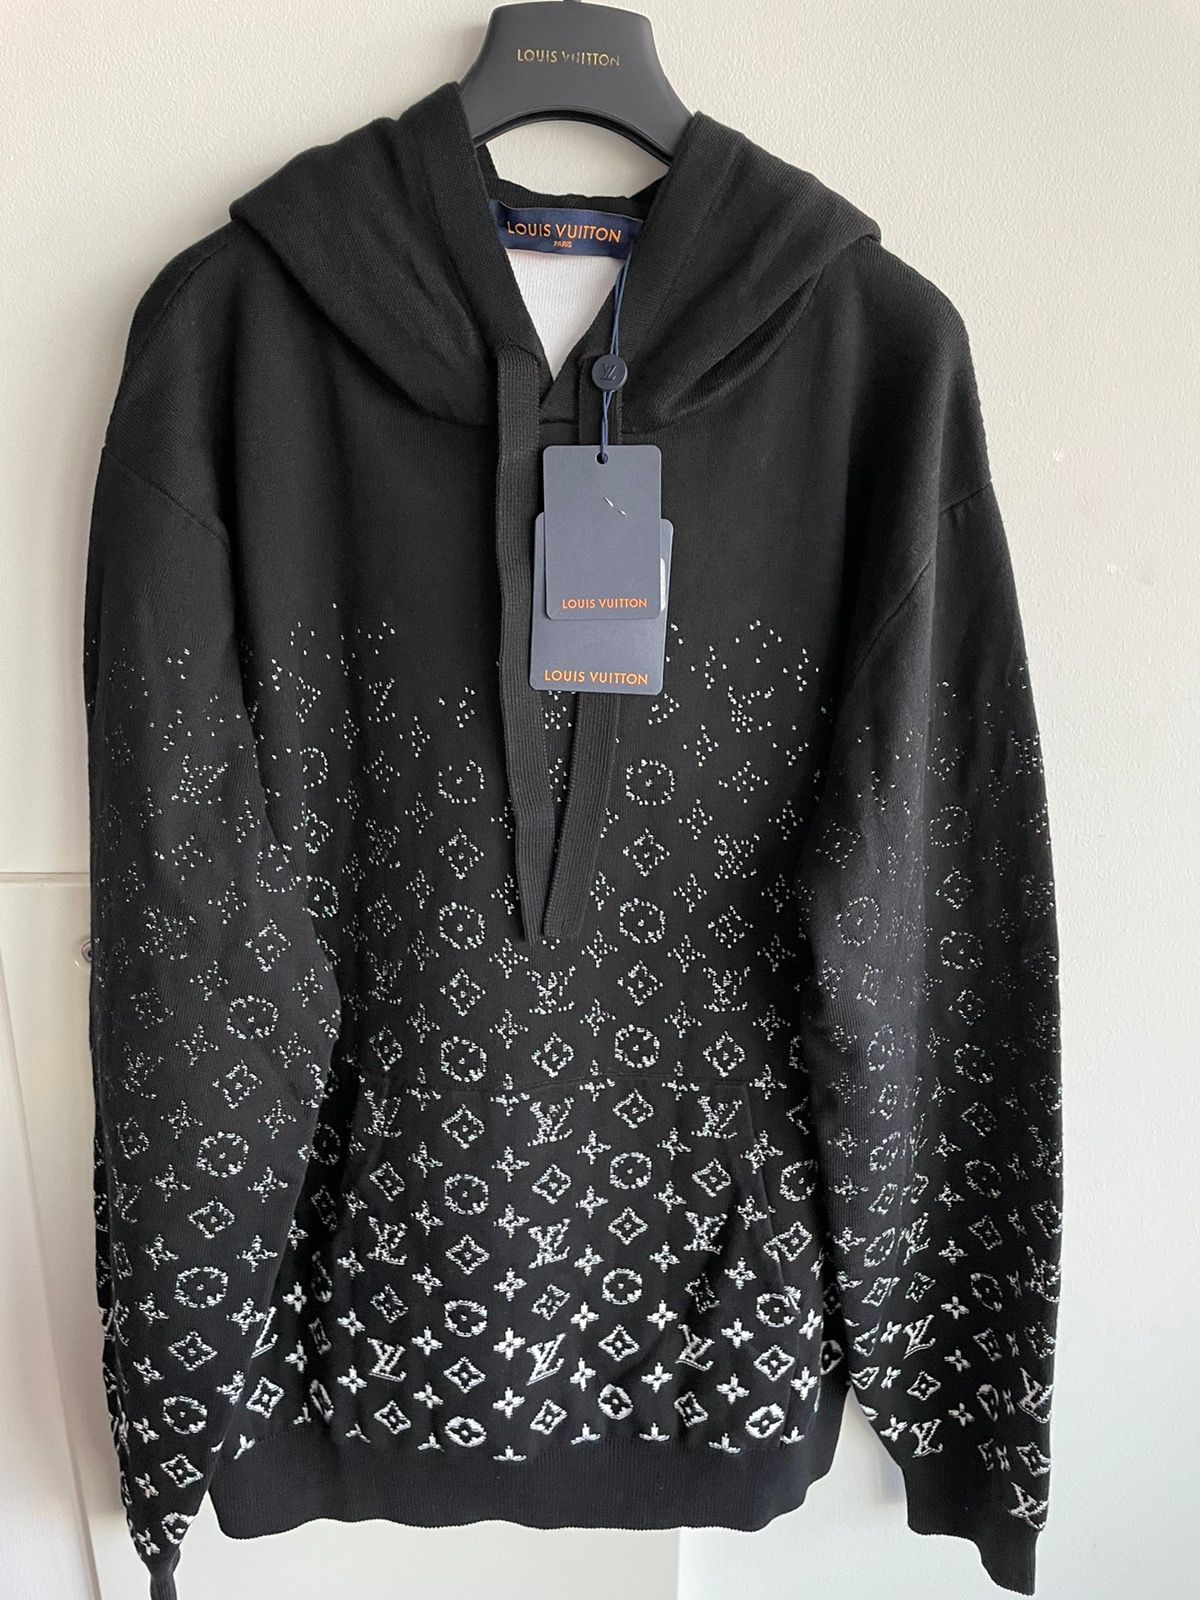 Louis Vuitton Super Runway Limited LV Monogram Hooded Sweater BRAND NEW